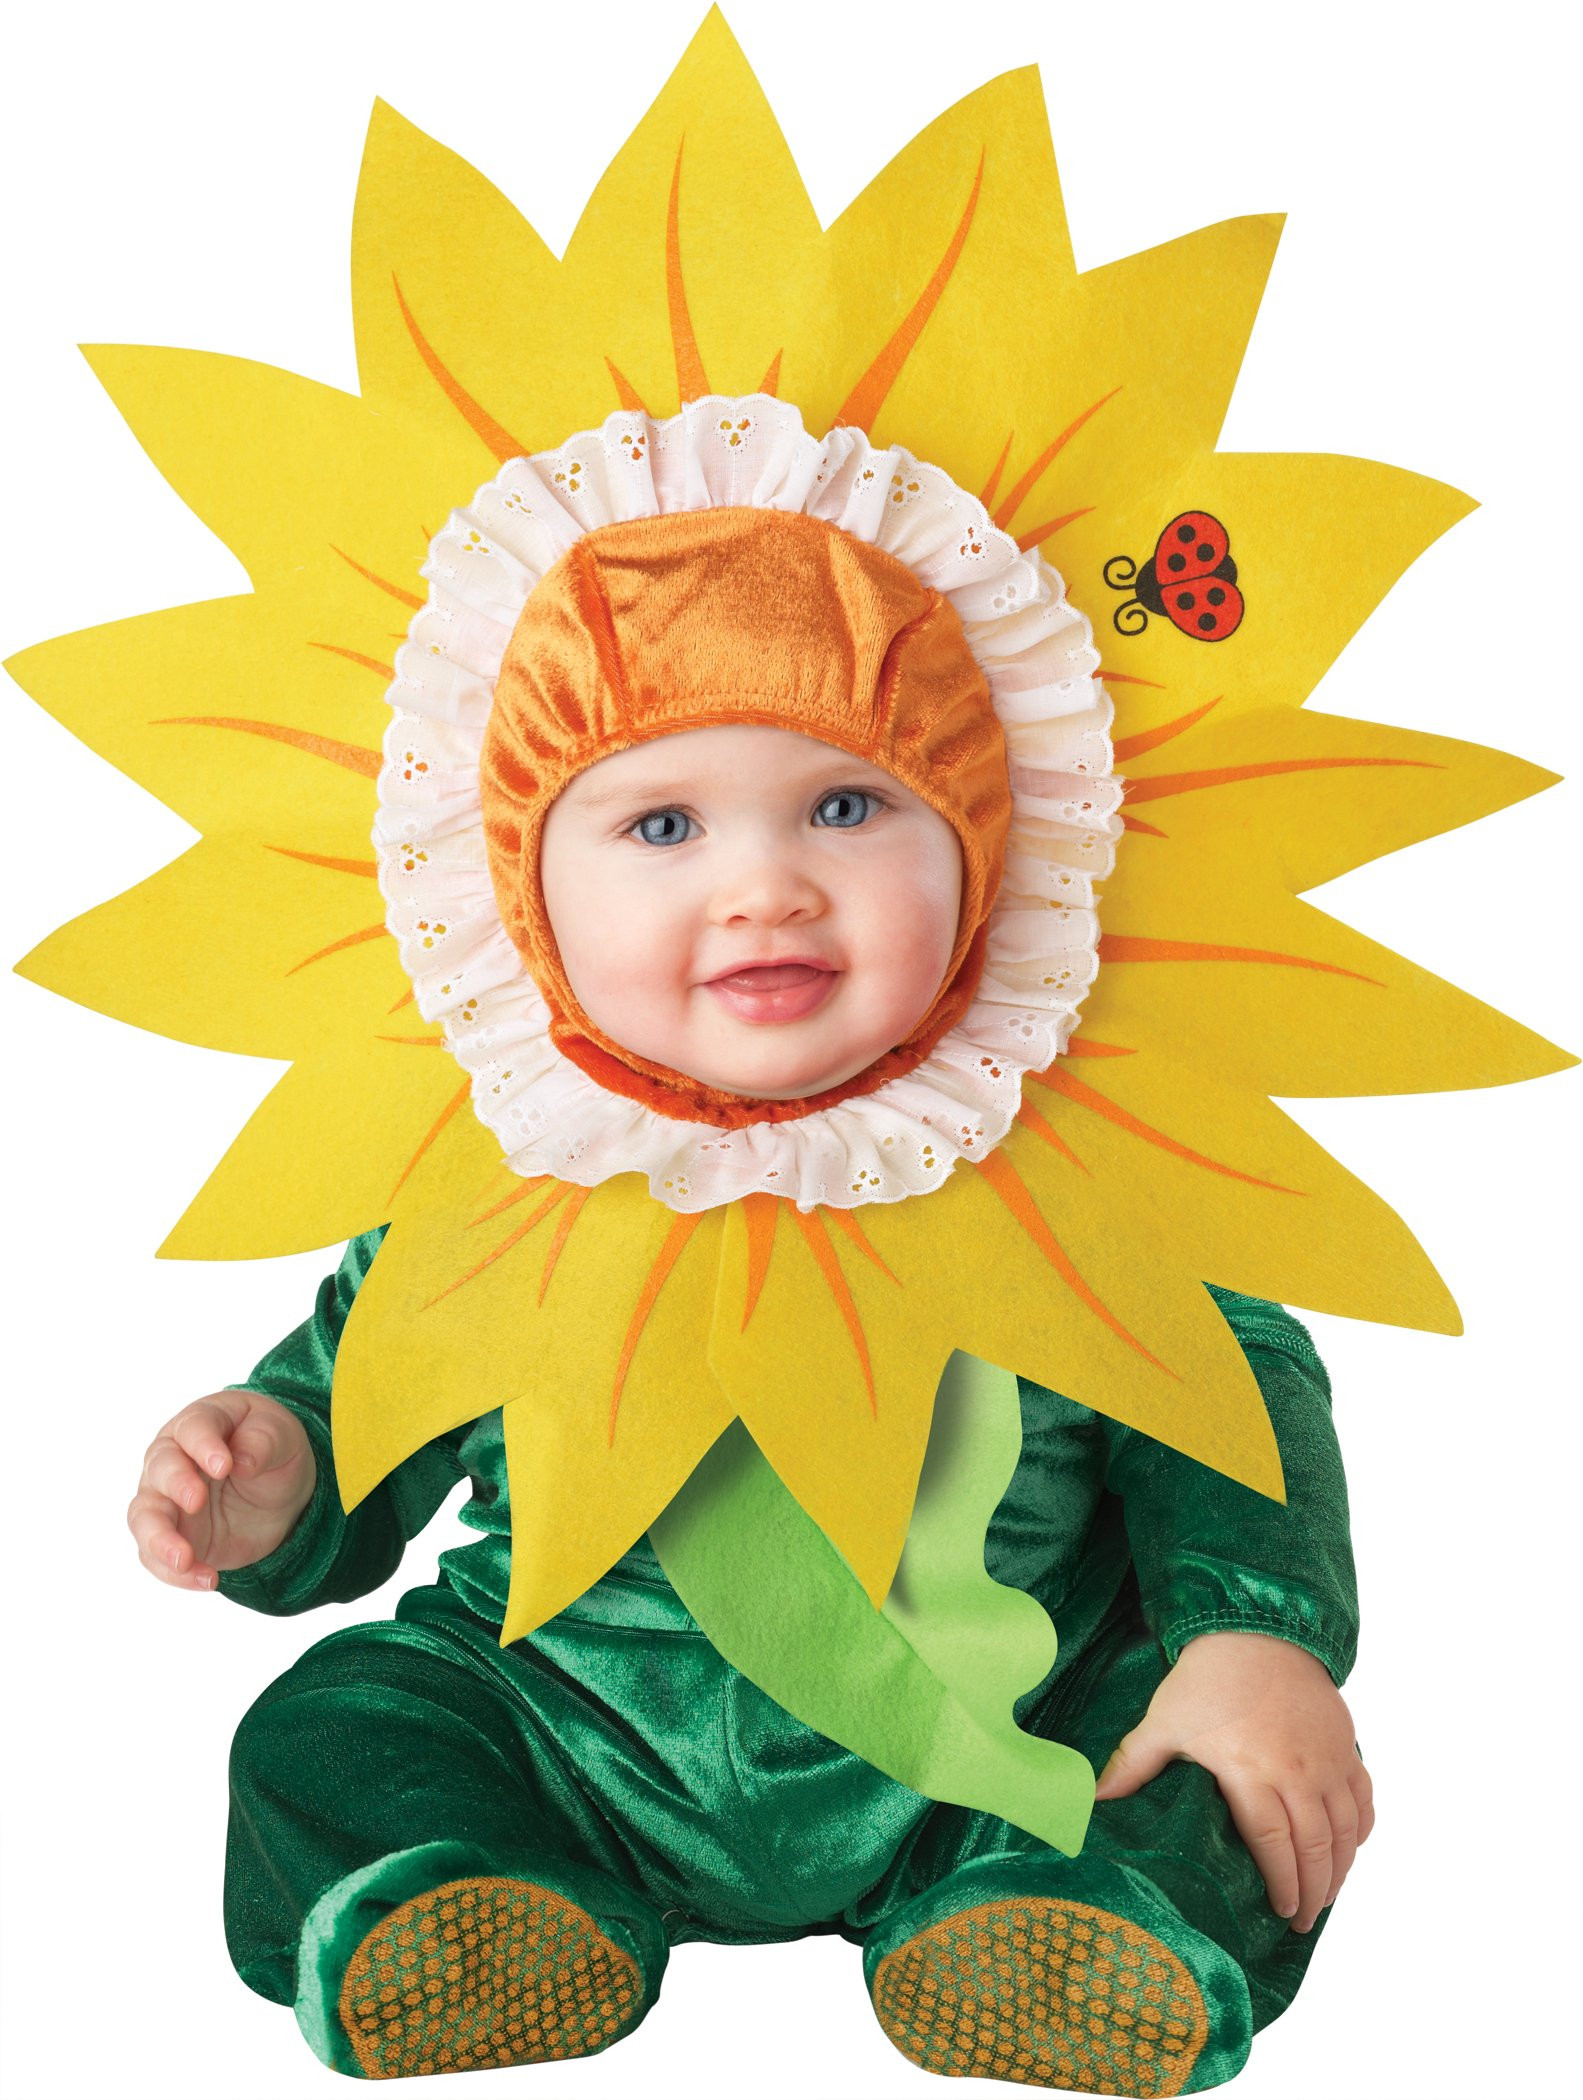 Baby Flower Halloween Costumes
 Infant Baby Girls Sunflower Flower Halloween Costume